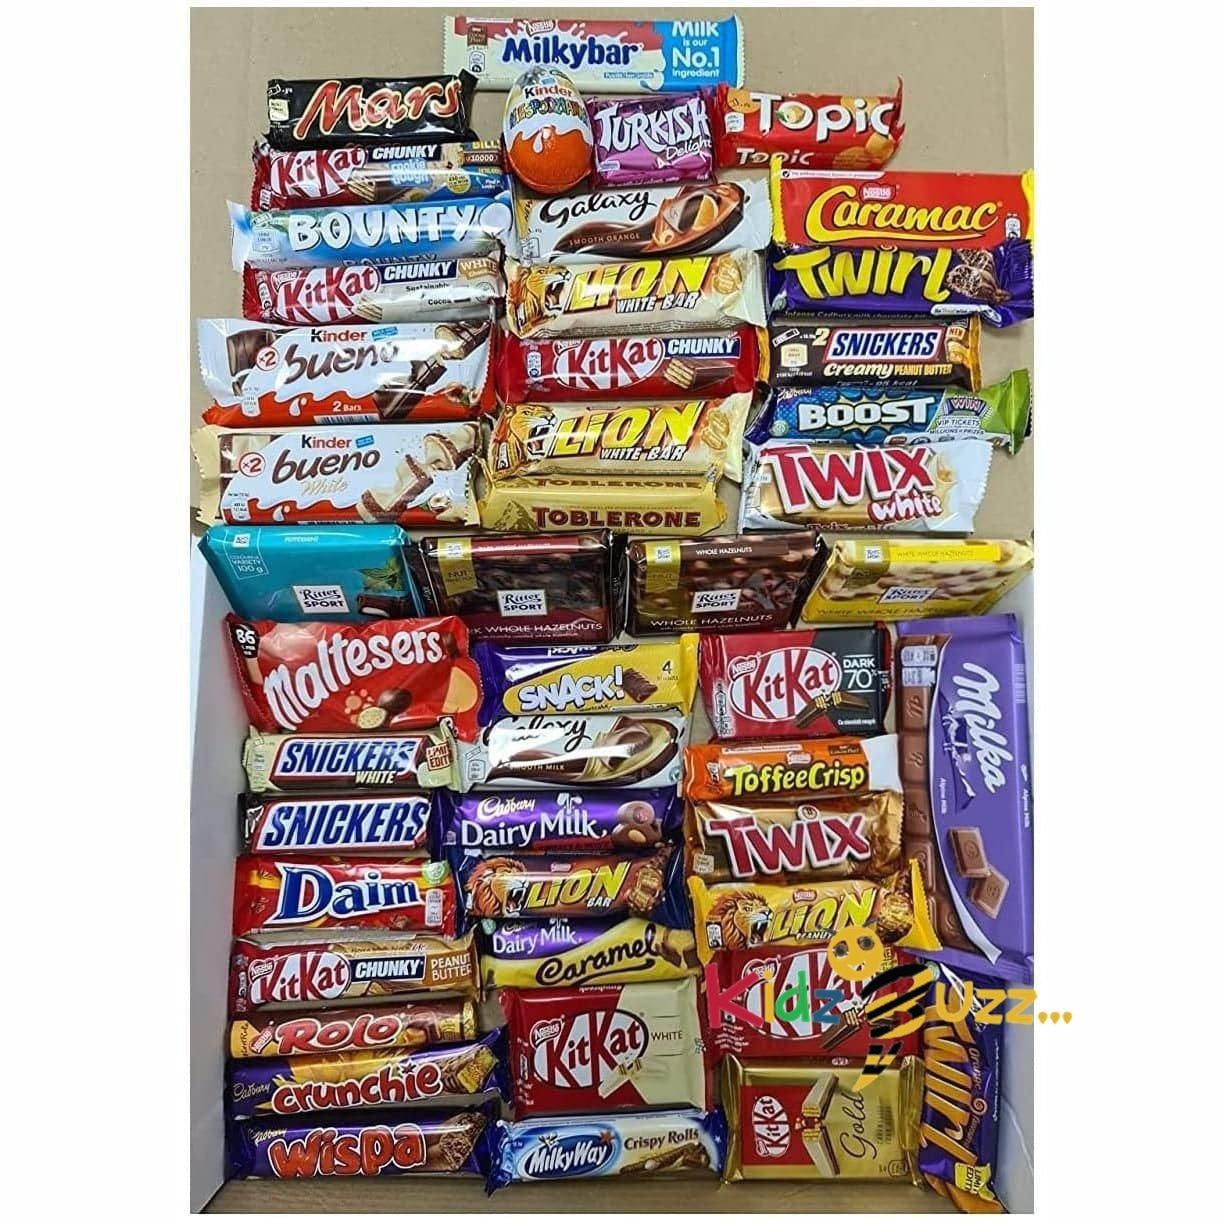 Chocolate Selection Of Delicious Mix Chocolate Bars Packed With 50 Adult & Kids Favourites Chocolate Bars - Perfect Chocolate Hamper, Birthday Present, Chirstmas Thank You Gift